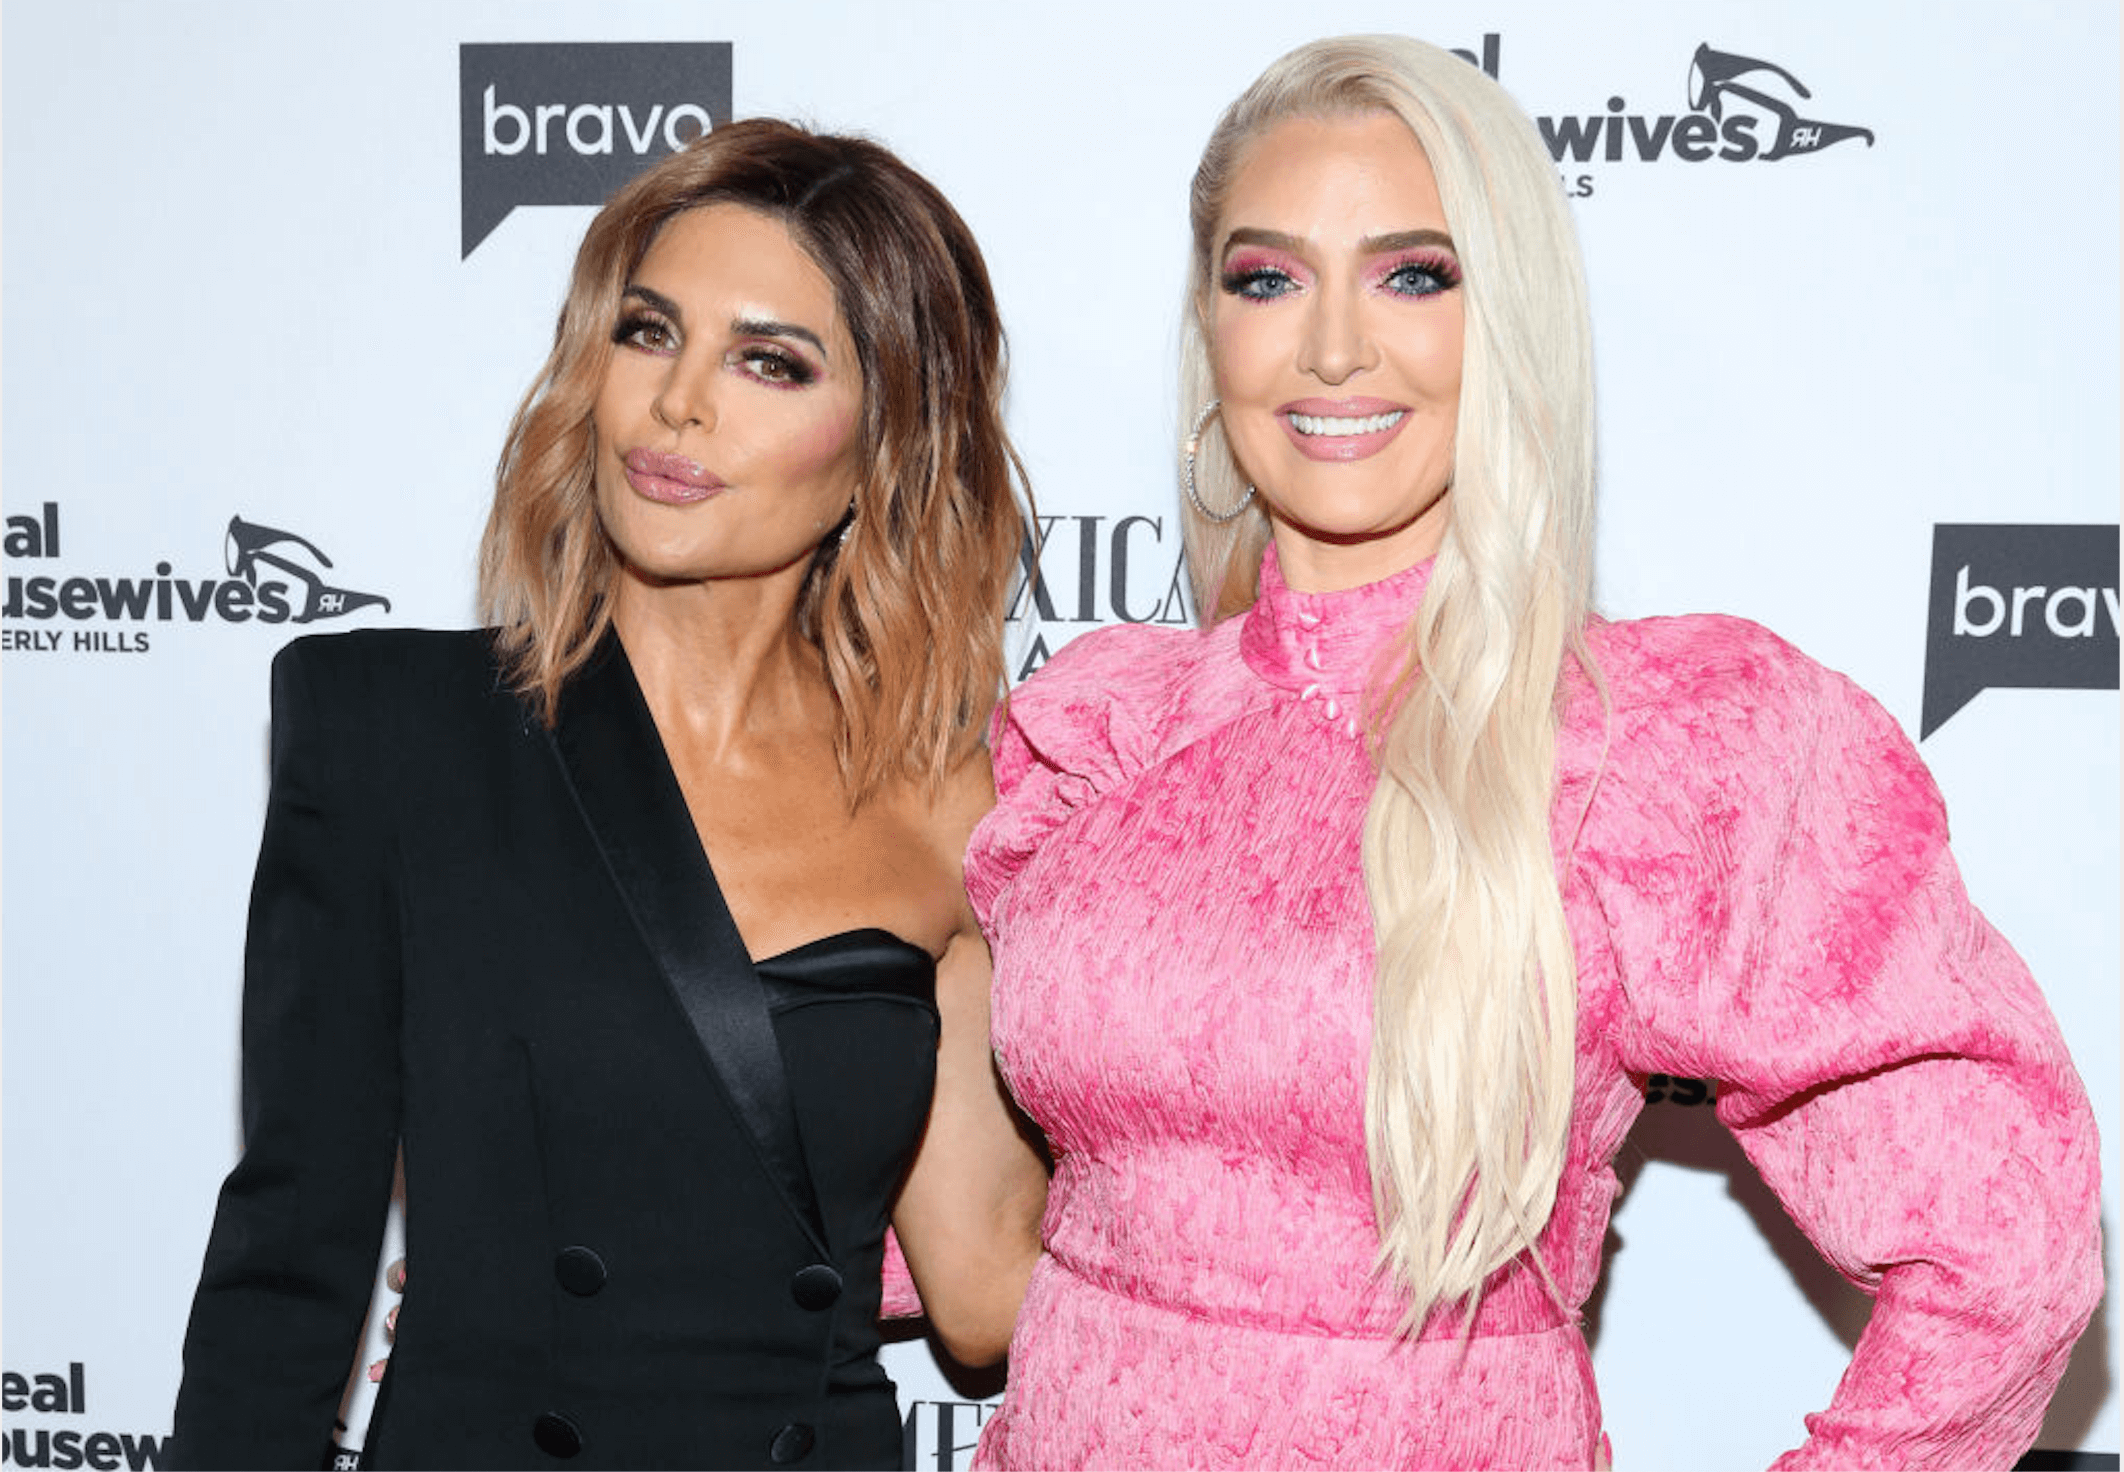 Erika Jayne’s Financial Records Reveal She Spent $156K On Company With The Same Name As Lisa Rinna’s Daughters’ Clothing Line!